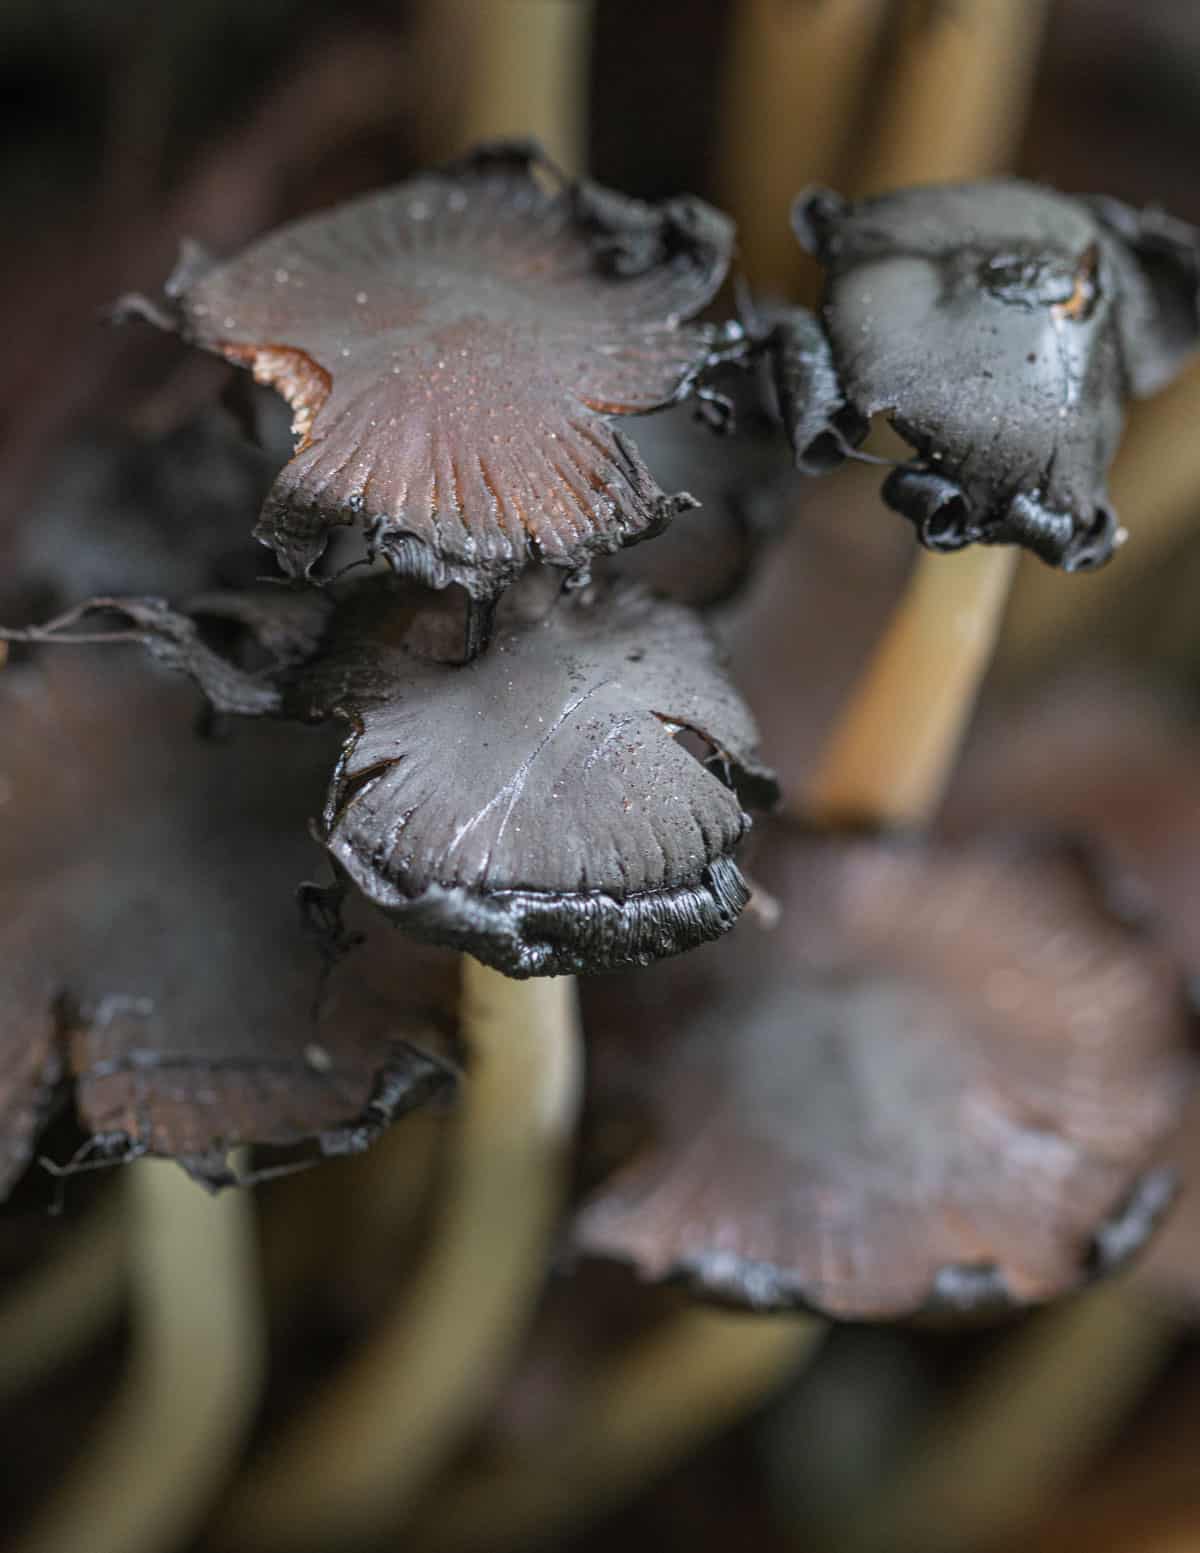 Coprinellus micaceus or mica cap mushrooms turning black and auto-digesting themselves into ink. 